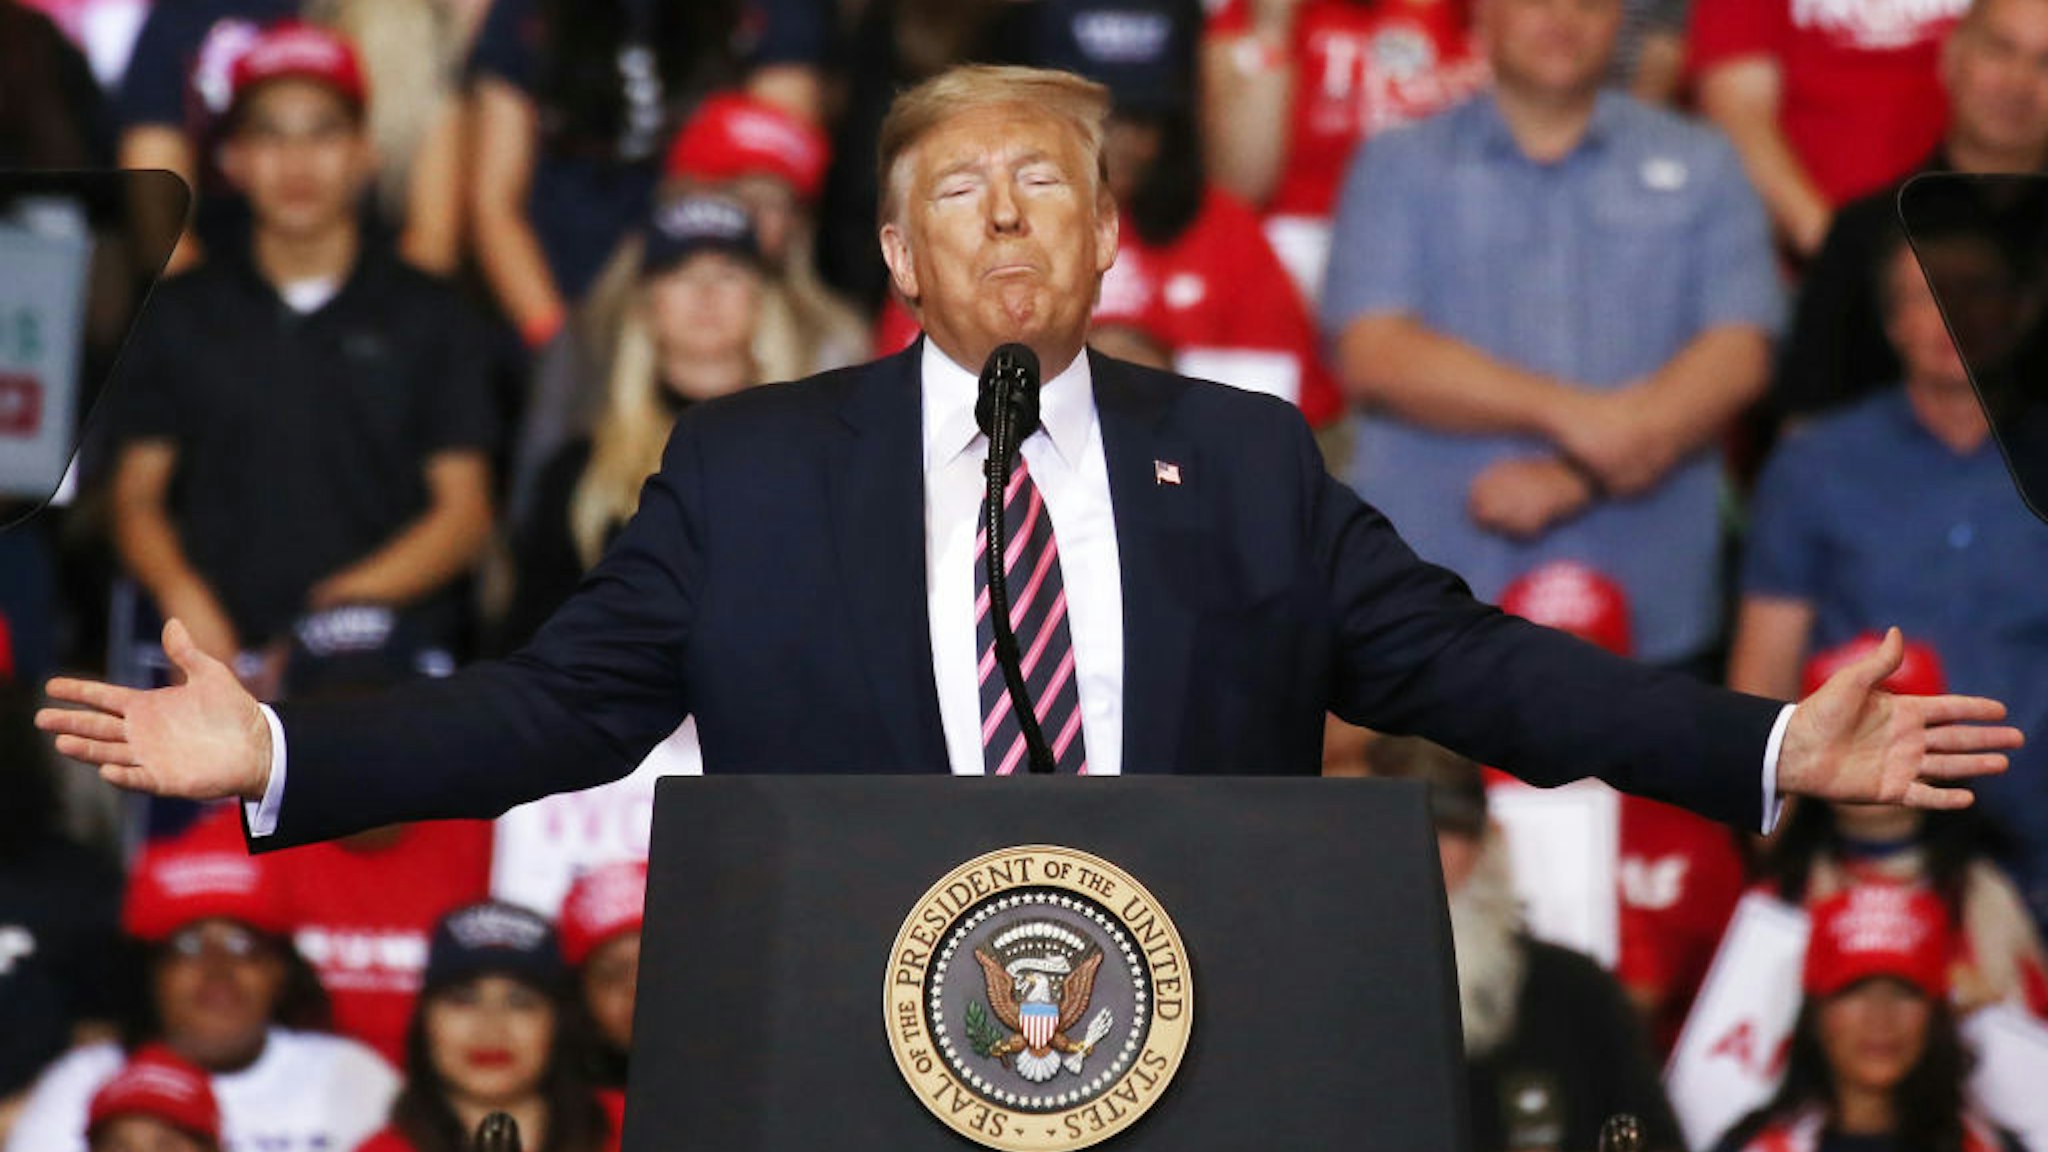 US President Donald Trump speaks at a campaign rally at Las Vegas Convention Center on February 21, 2020 in Las Vegas, Nevada. The upcoming Nevada Democratic presidential caucus will be held February 22.